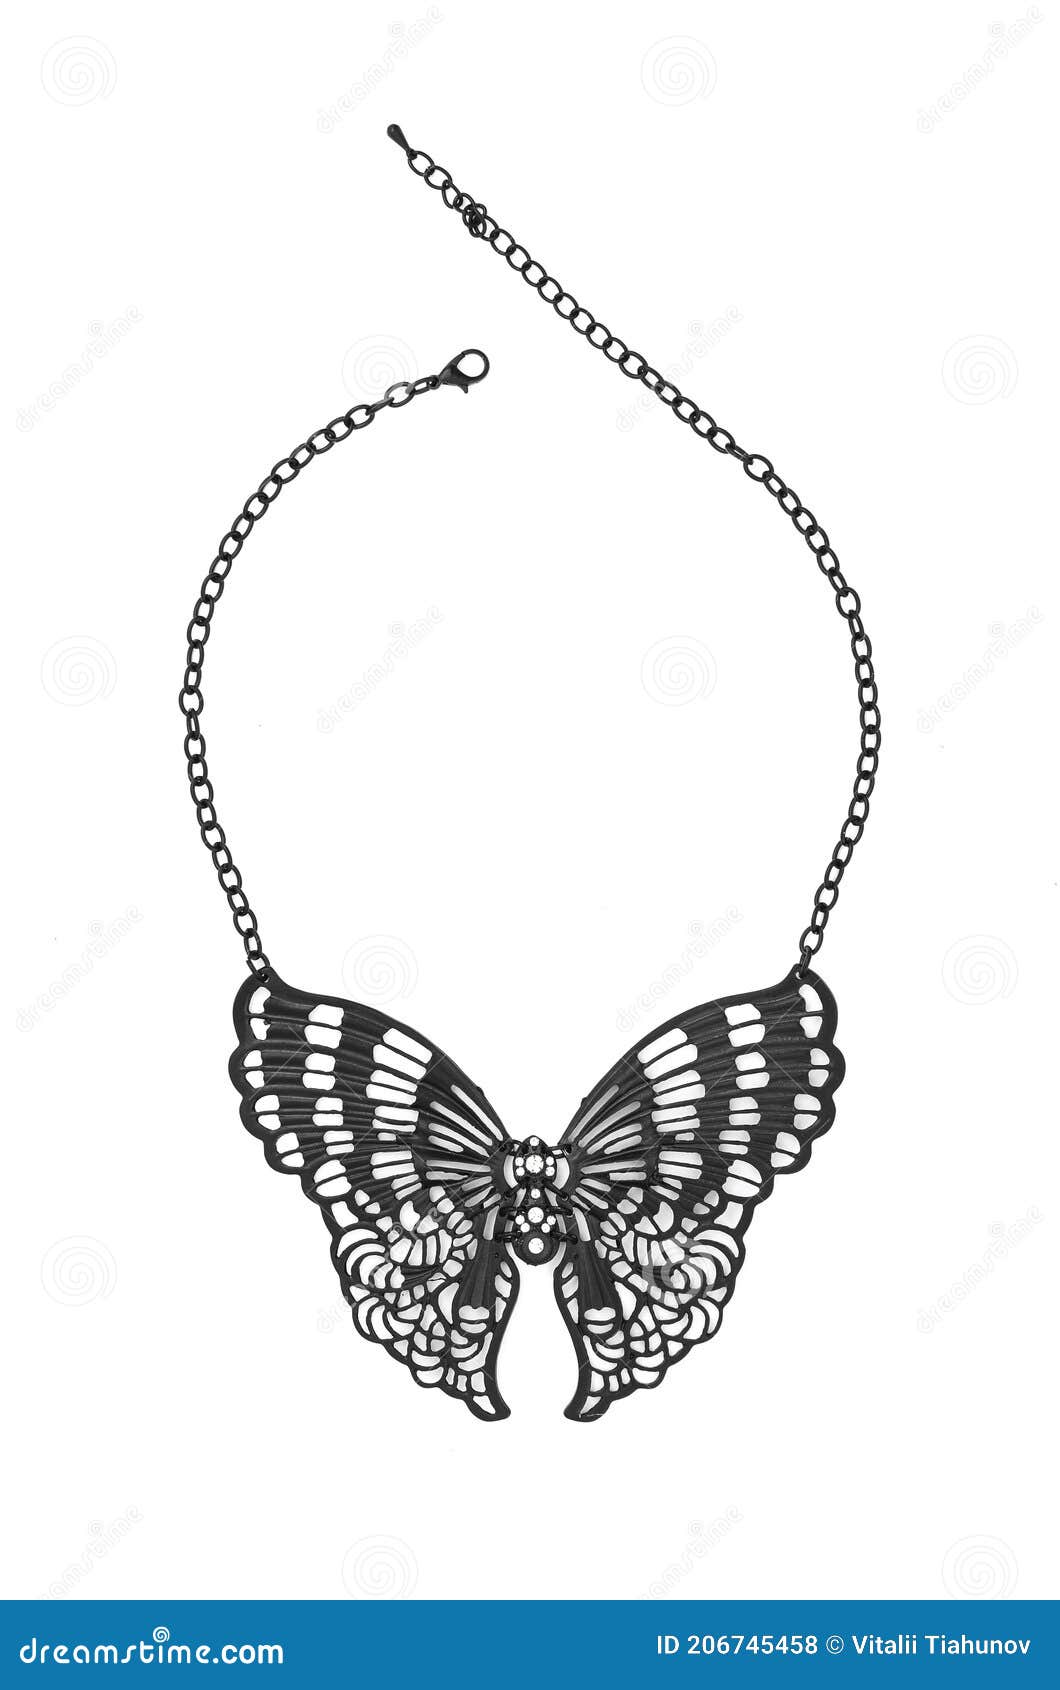 Pendant with Butterfly Isolated on White Stock Photo - Image of ...